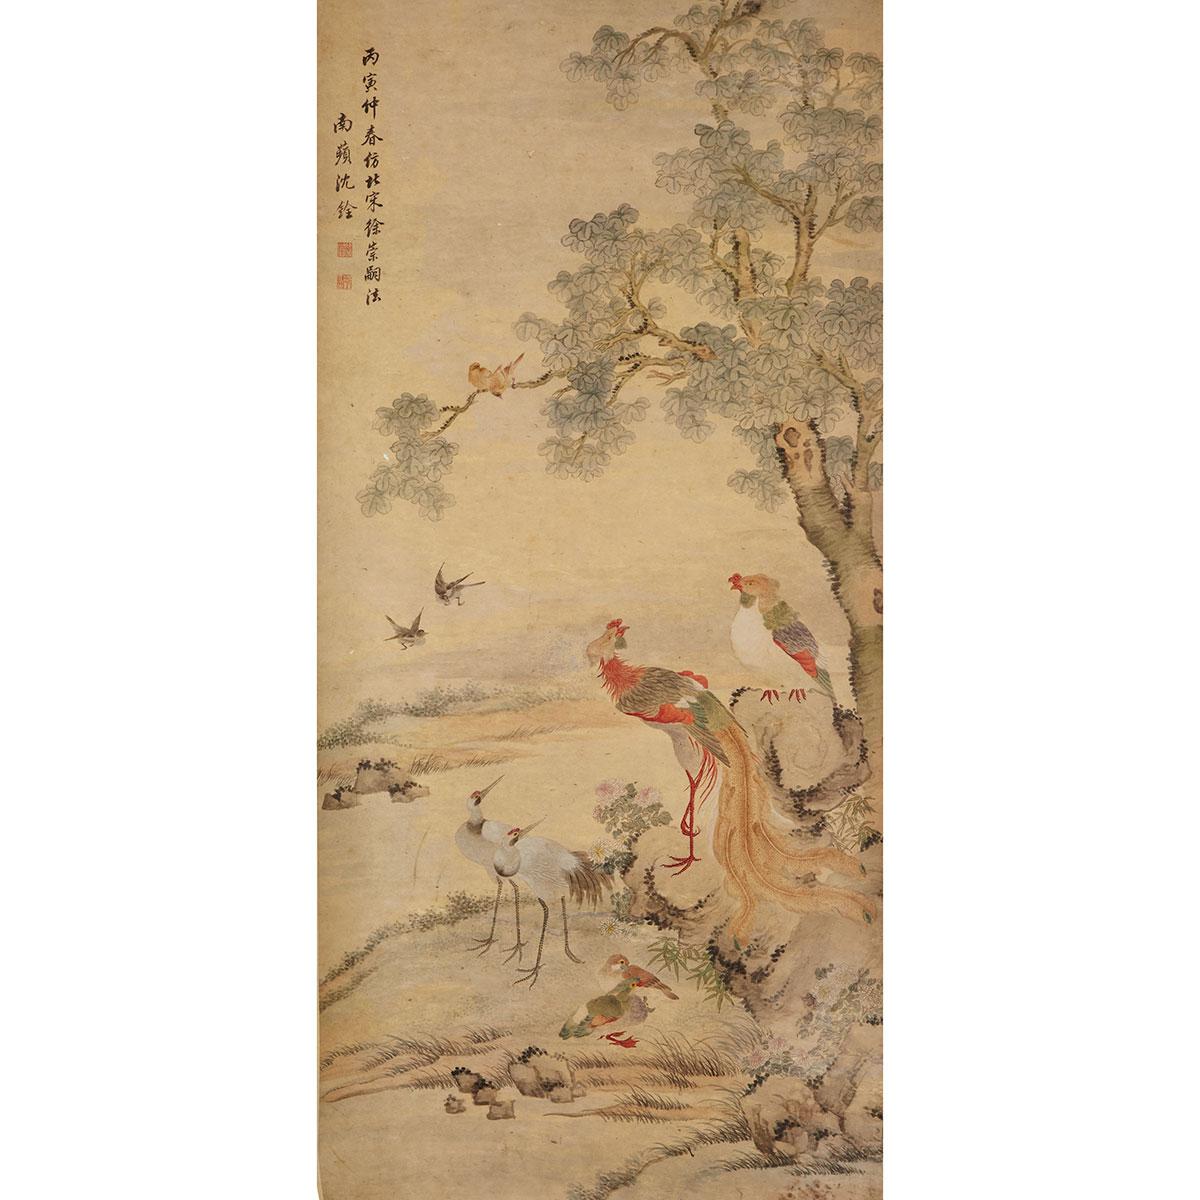 Attributed to Shen Quan (1682-1760)